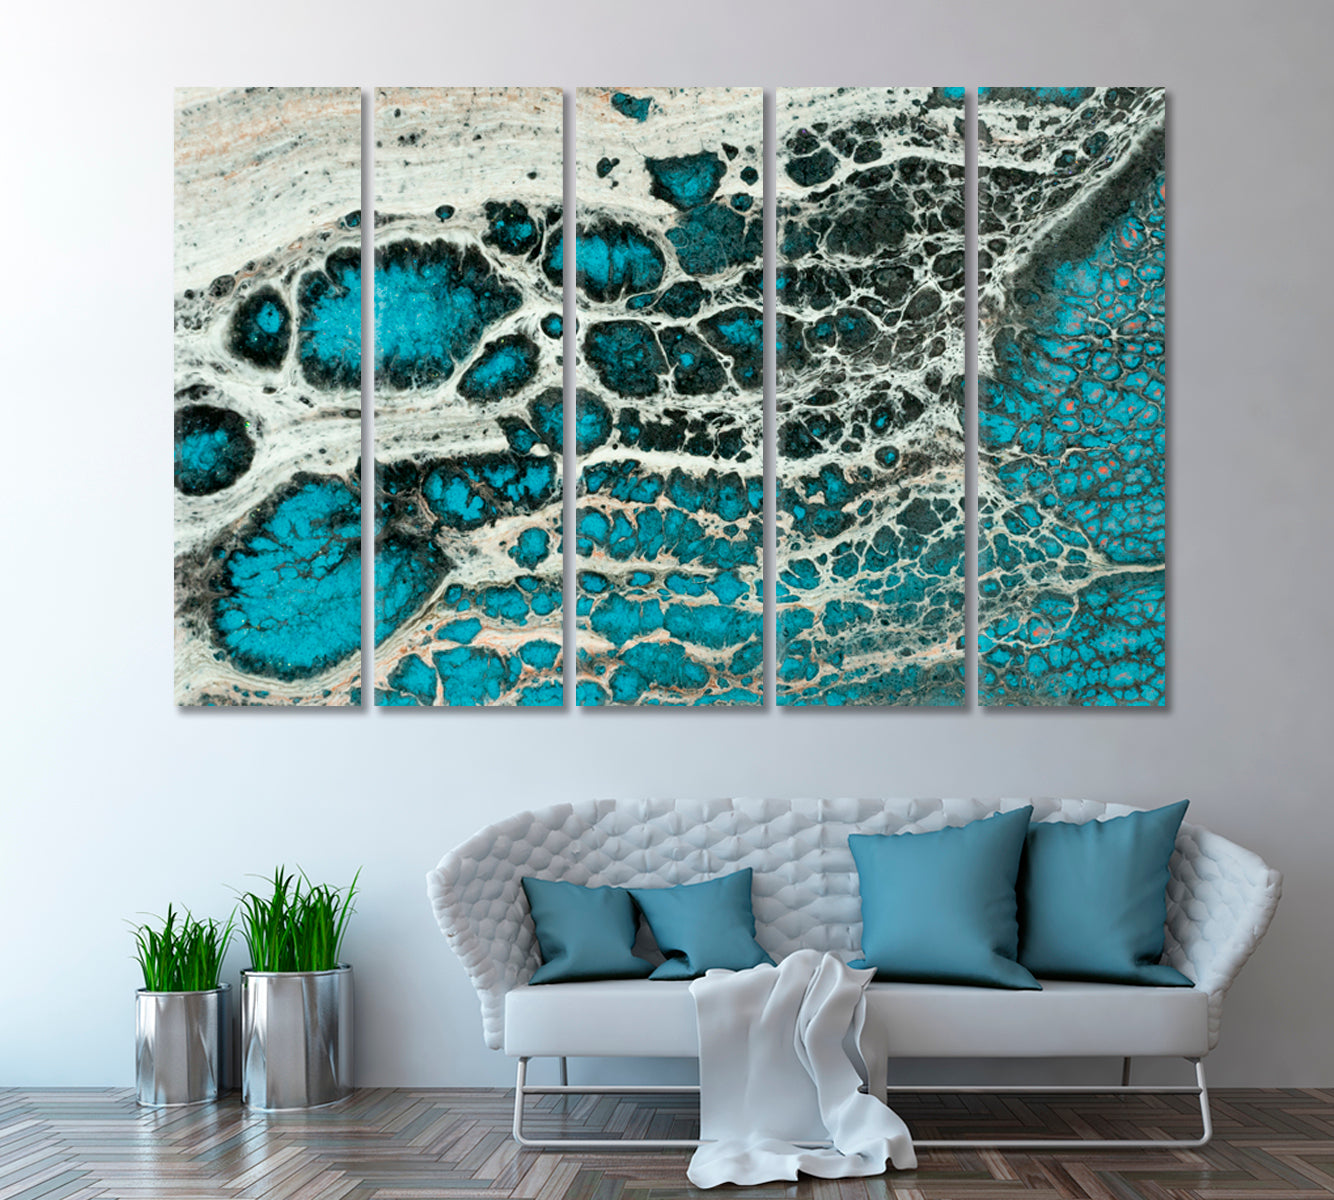 Abstract Cracked Marble Canvas Print ArtLexy 5 Panels 36"x24" inches 